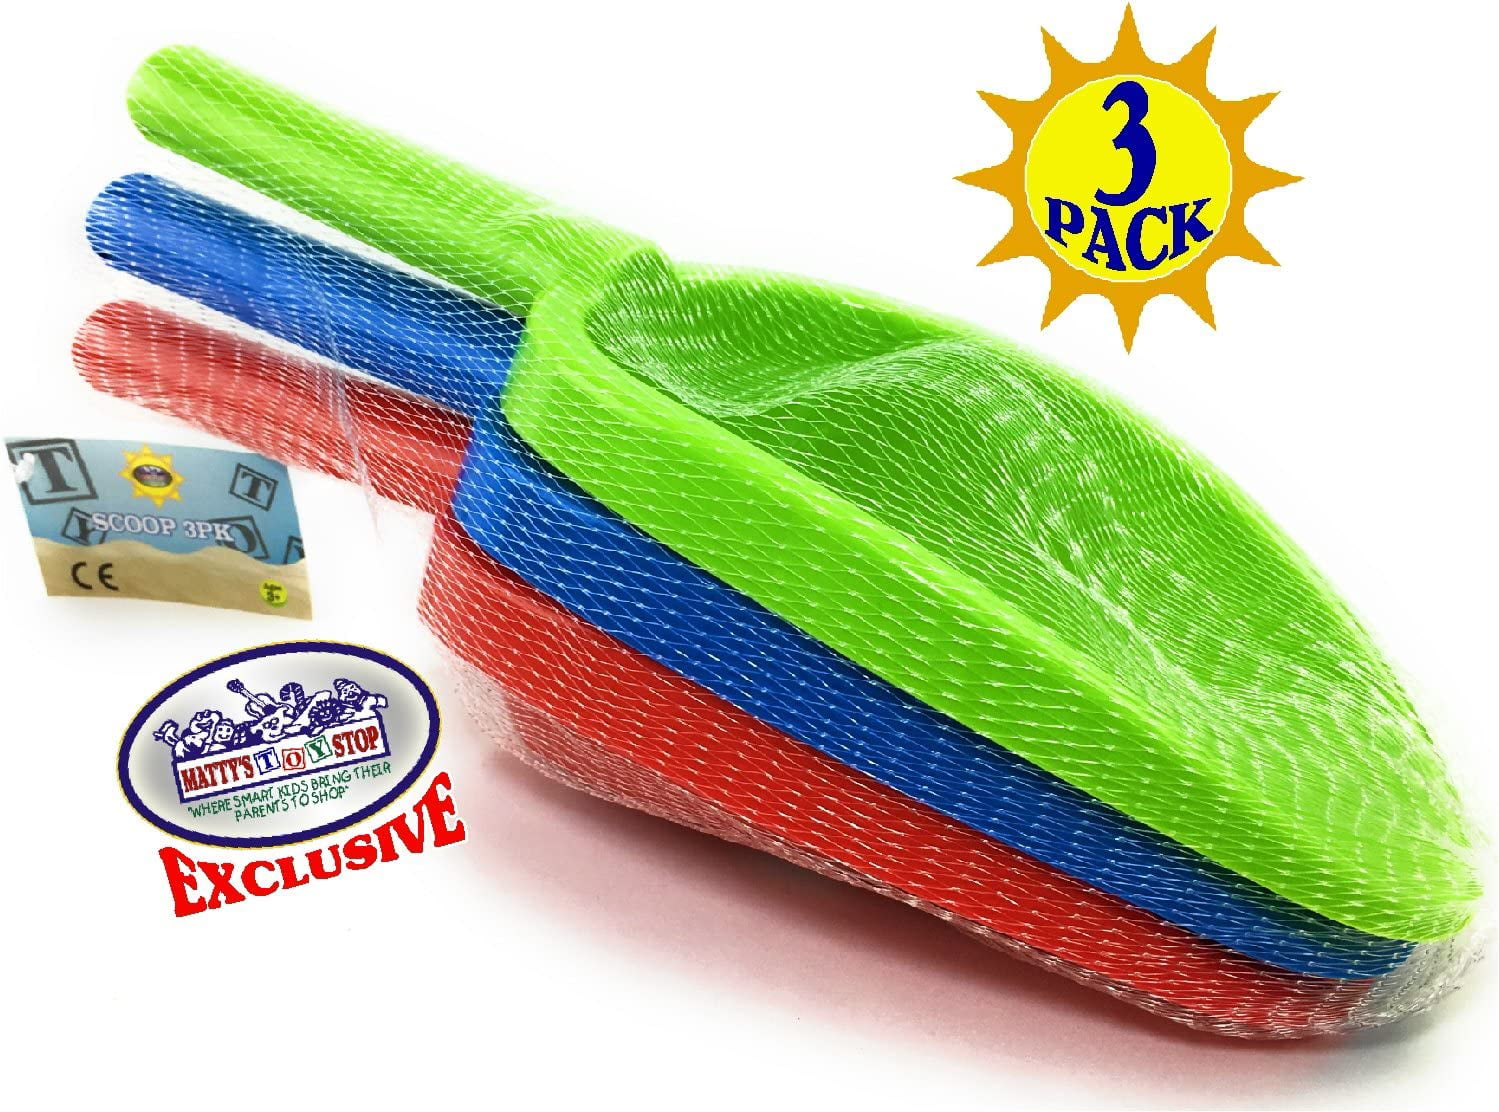 Red, Yellow, Orange & Green Mattys Toy Stop 7 Plastic Sand Digger Scoop Claws for Sand & Beach 4 Pack Complete Gift Set Bundle 